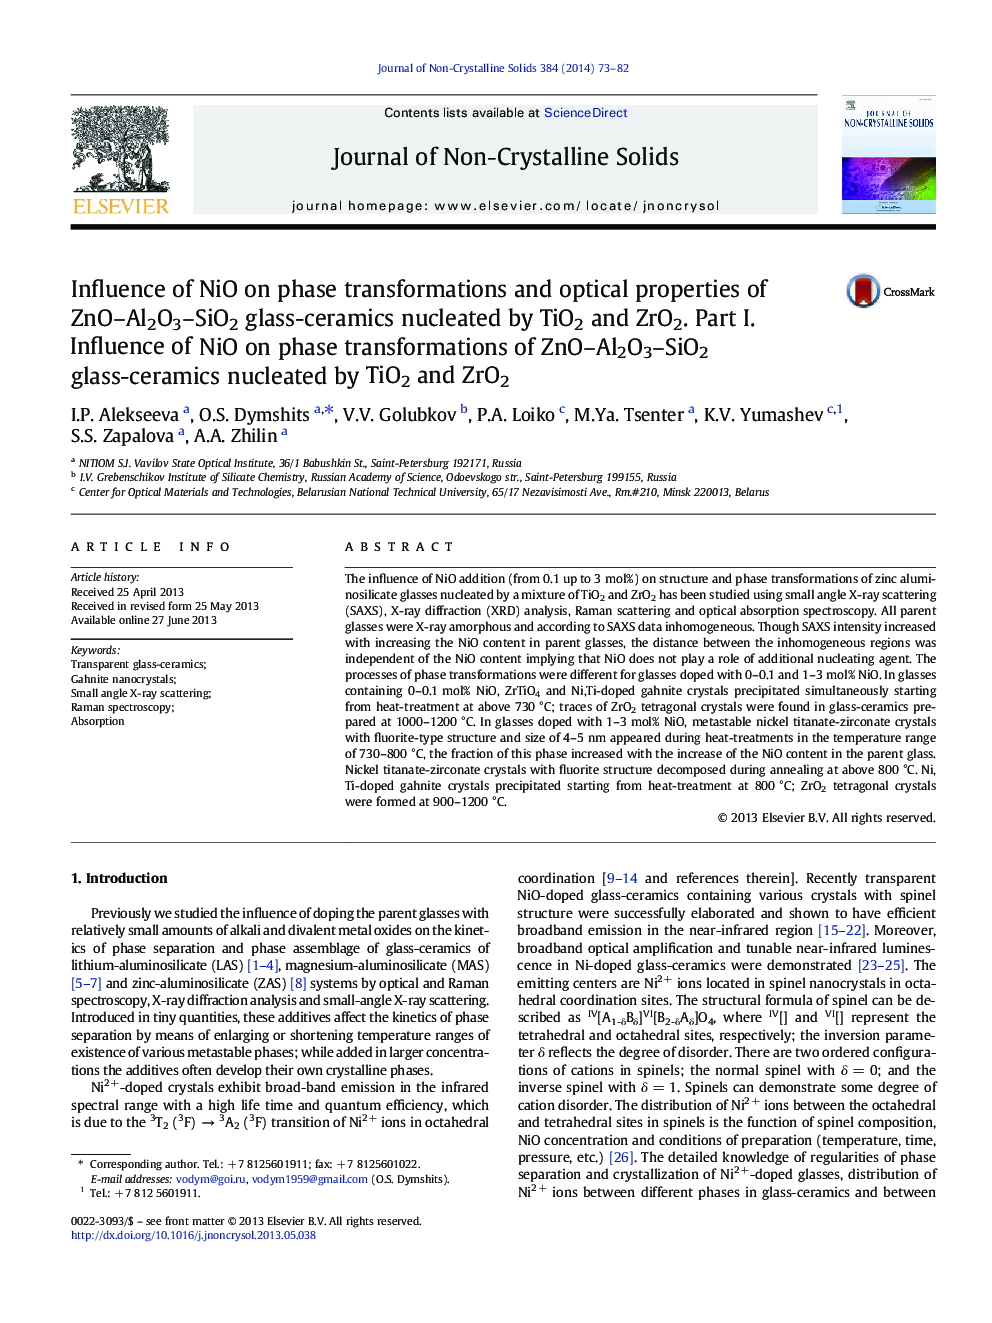 Influence of NiO on phase transformations and optical properties of ZnO–Al2O3–SiO2 glass-ceramics nucleated by TiO2 and ZrO2. Part I. Influence of NiO on phase transformations of ZnO–Al2O3–SiO2 glass-ceramics nucleated by TiO2 and ZrO2